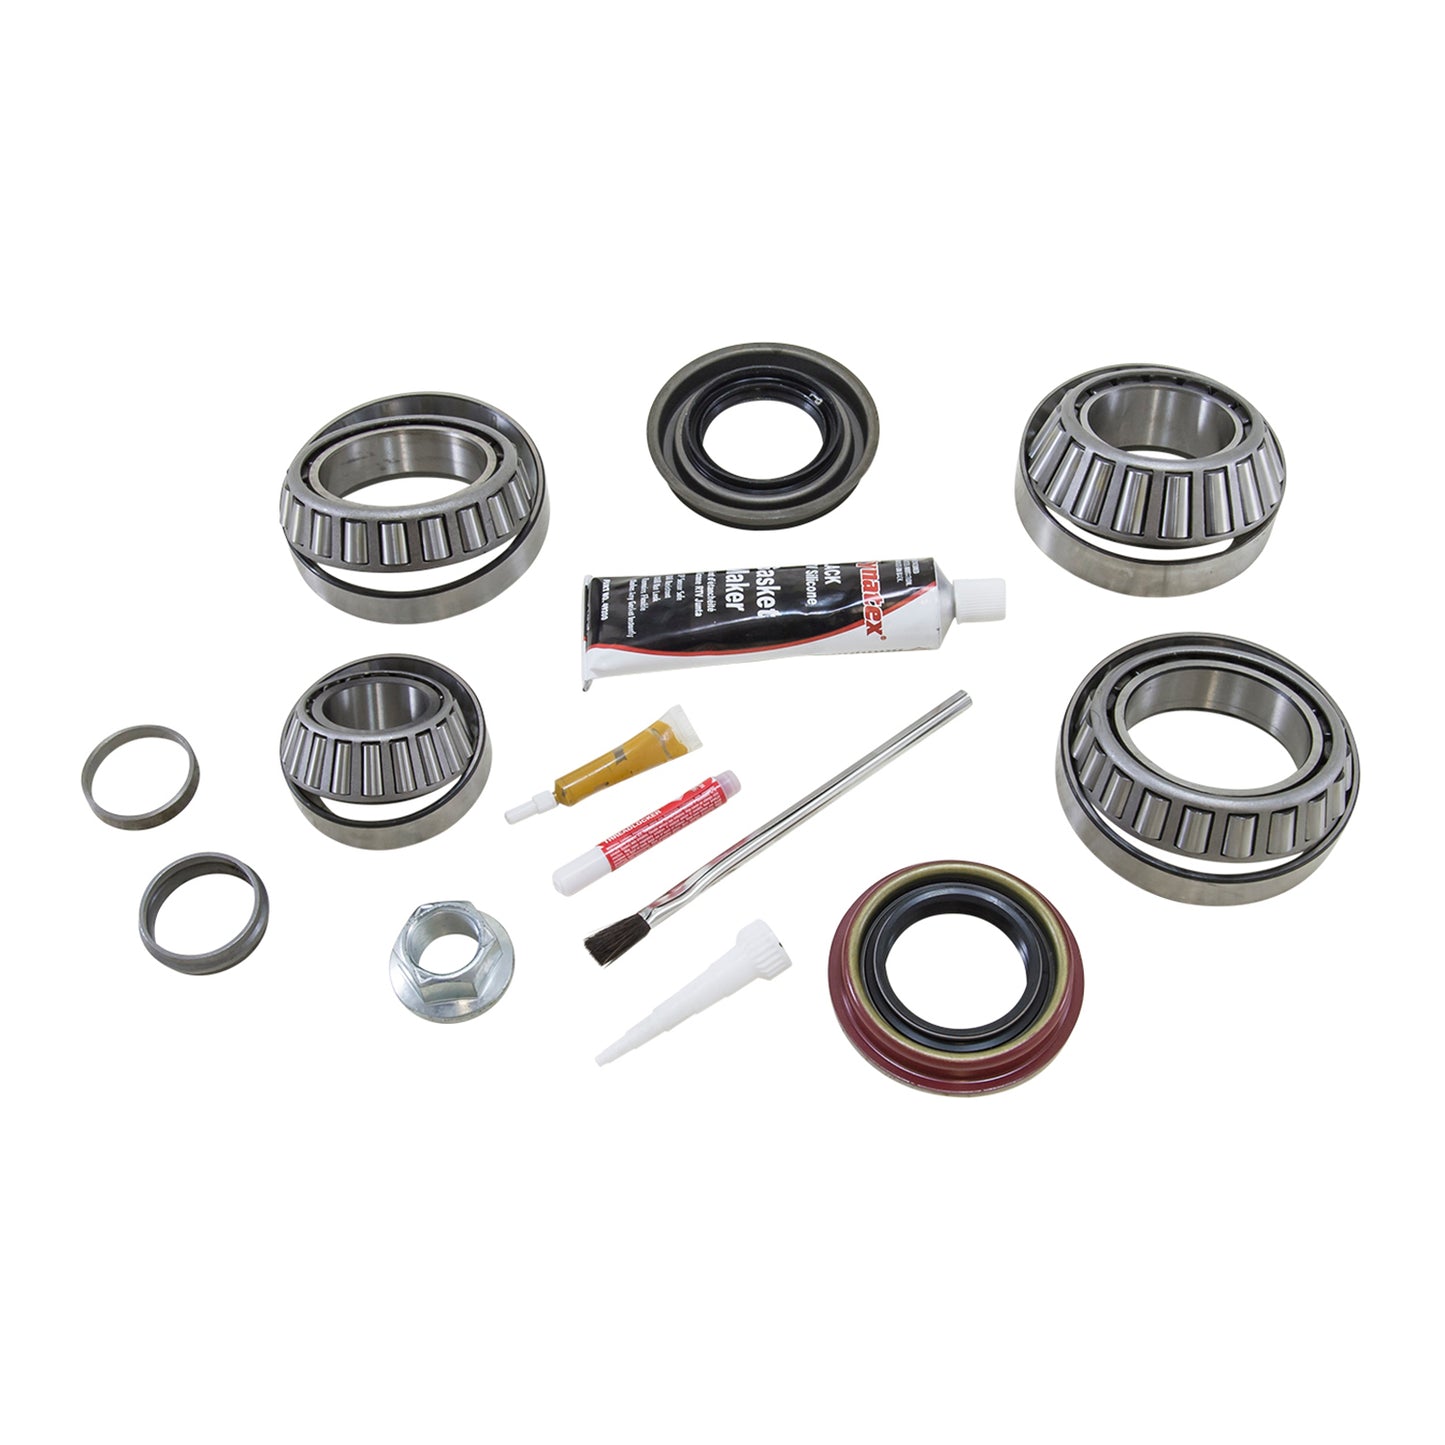 Yukon Gear bearing install kit for '11 & up Ford 9.75" differential. BK F9.75-A